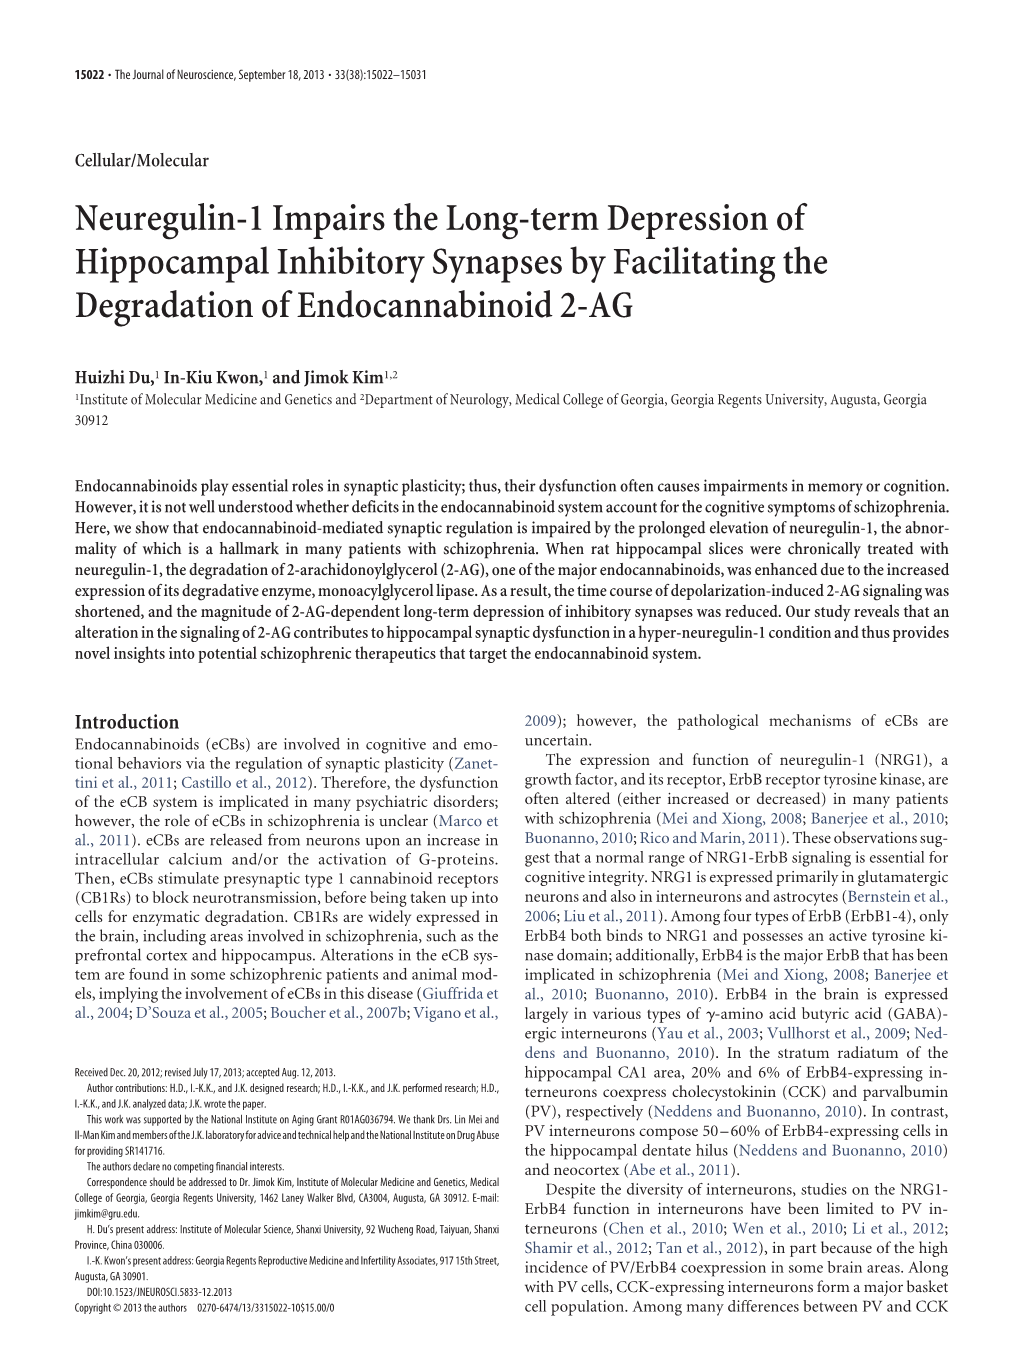 Neuregulin-1 Impairs the Long-Term Depression of Hippocampal Inhibitory Synapses by Facilitating the Degradation of Endocannabinoid 2-AG